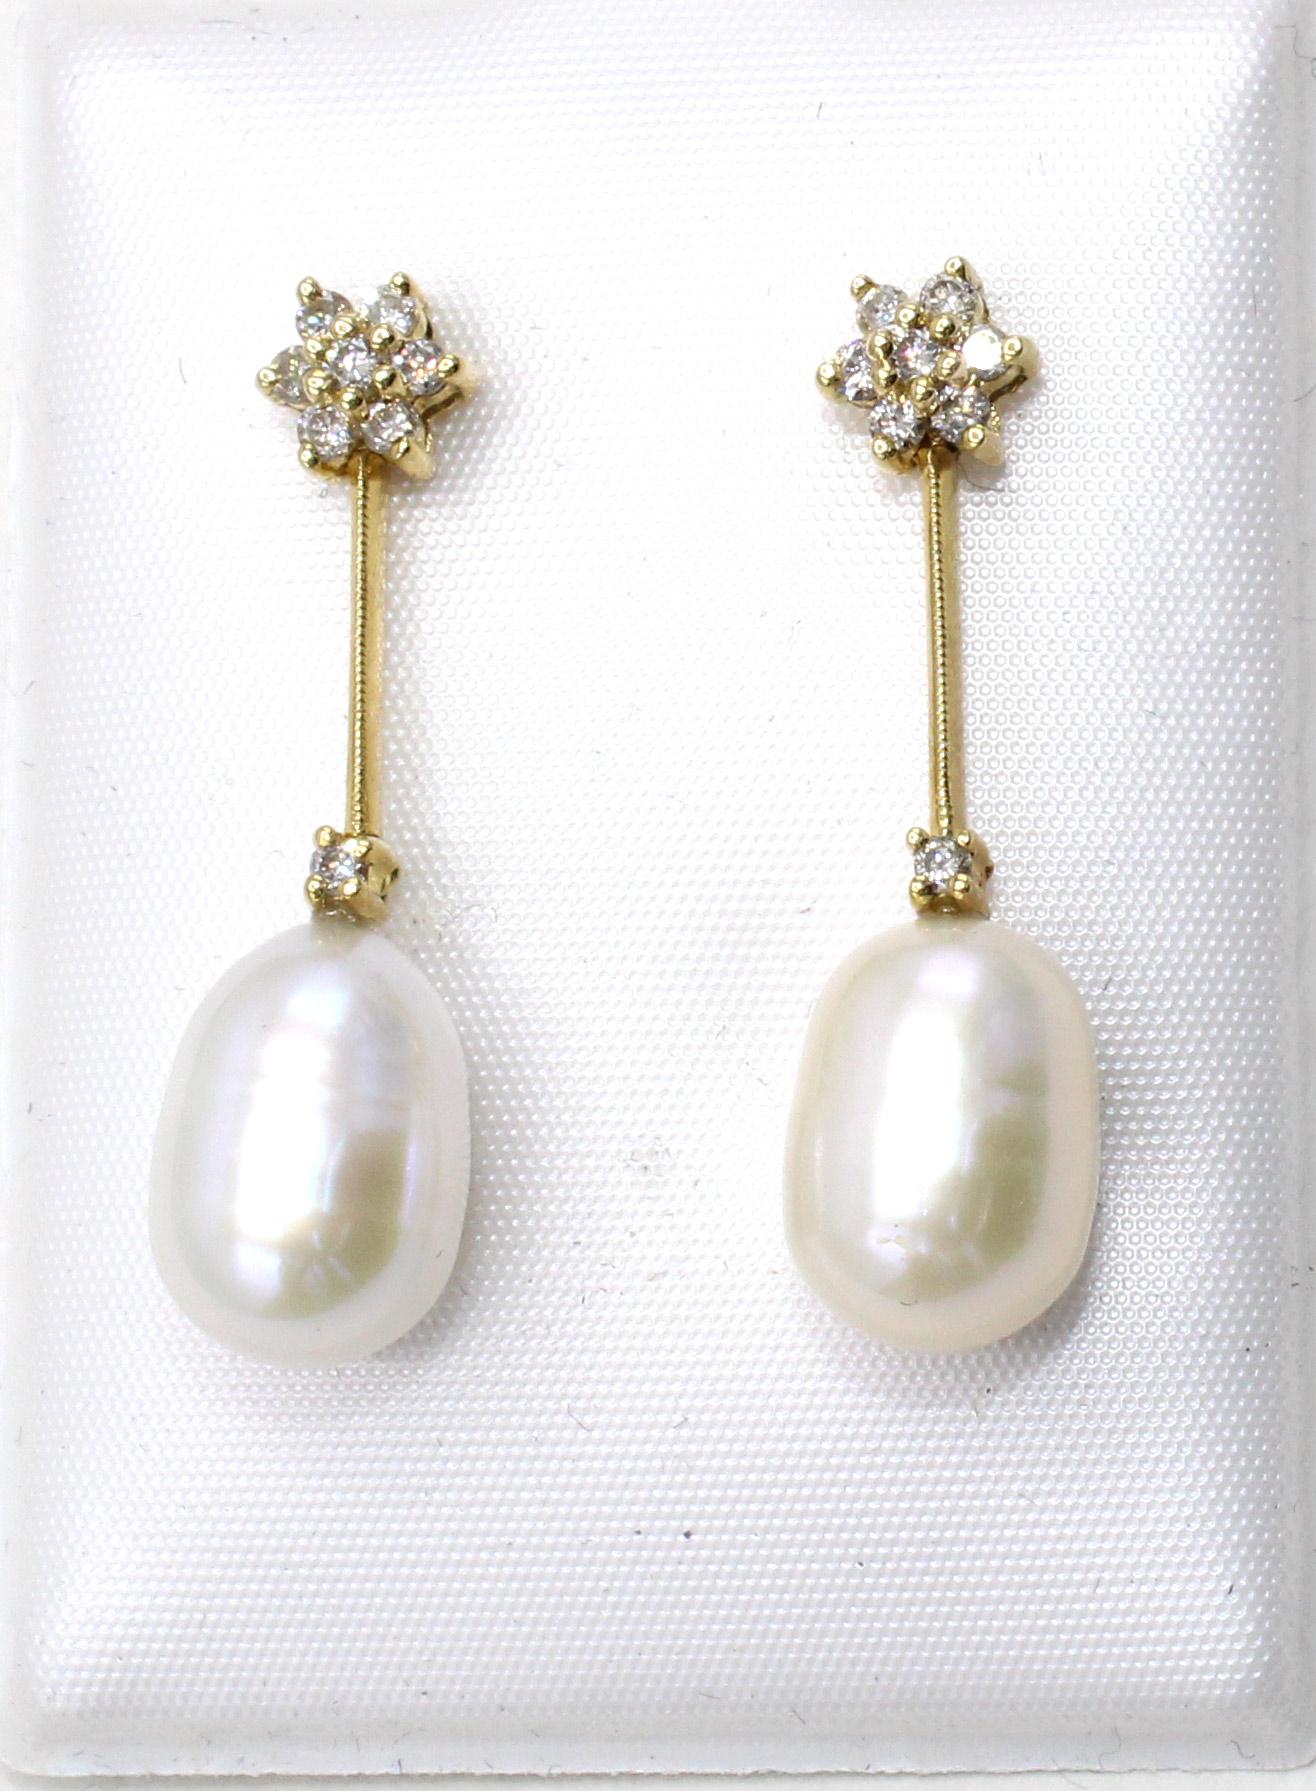 These chic and flexible ear pendants feature 2 perfectly matched cultured pearls measuring approximately 13.30 millimeters in length and 8.95 millimeters in width. The pearls have an amazing luster and are white in color with a slight pinkish-cream